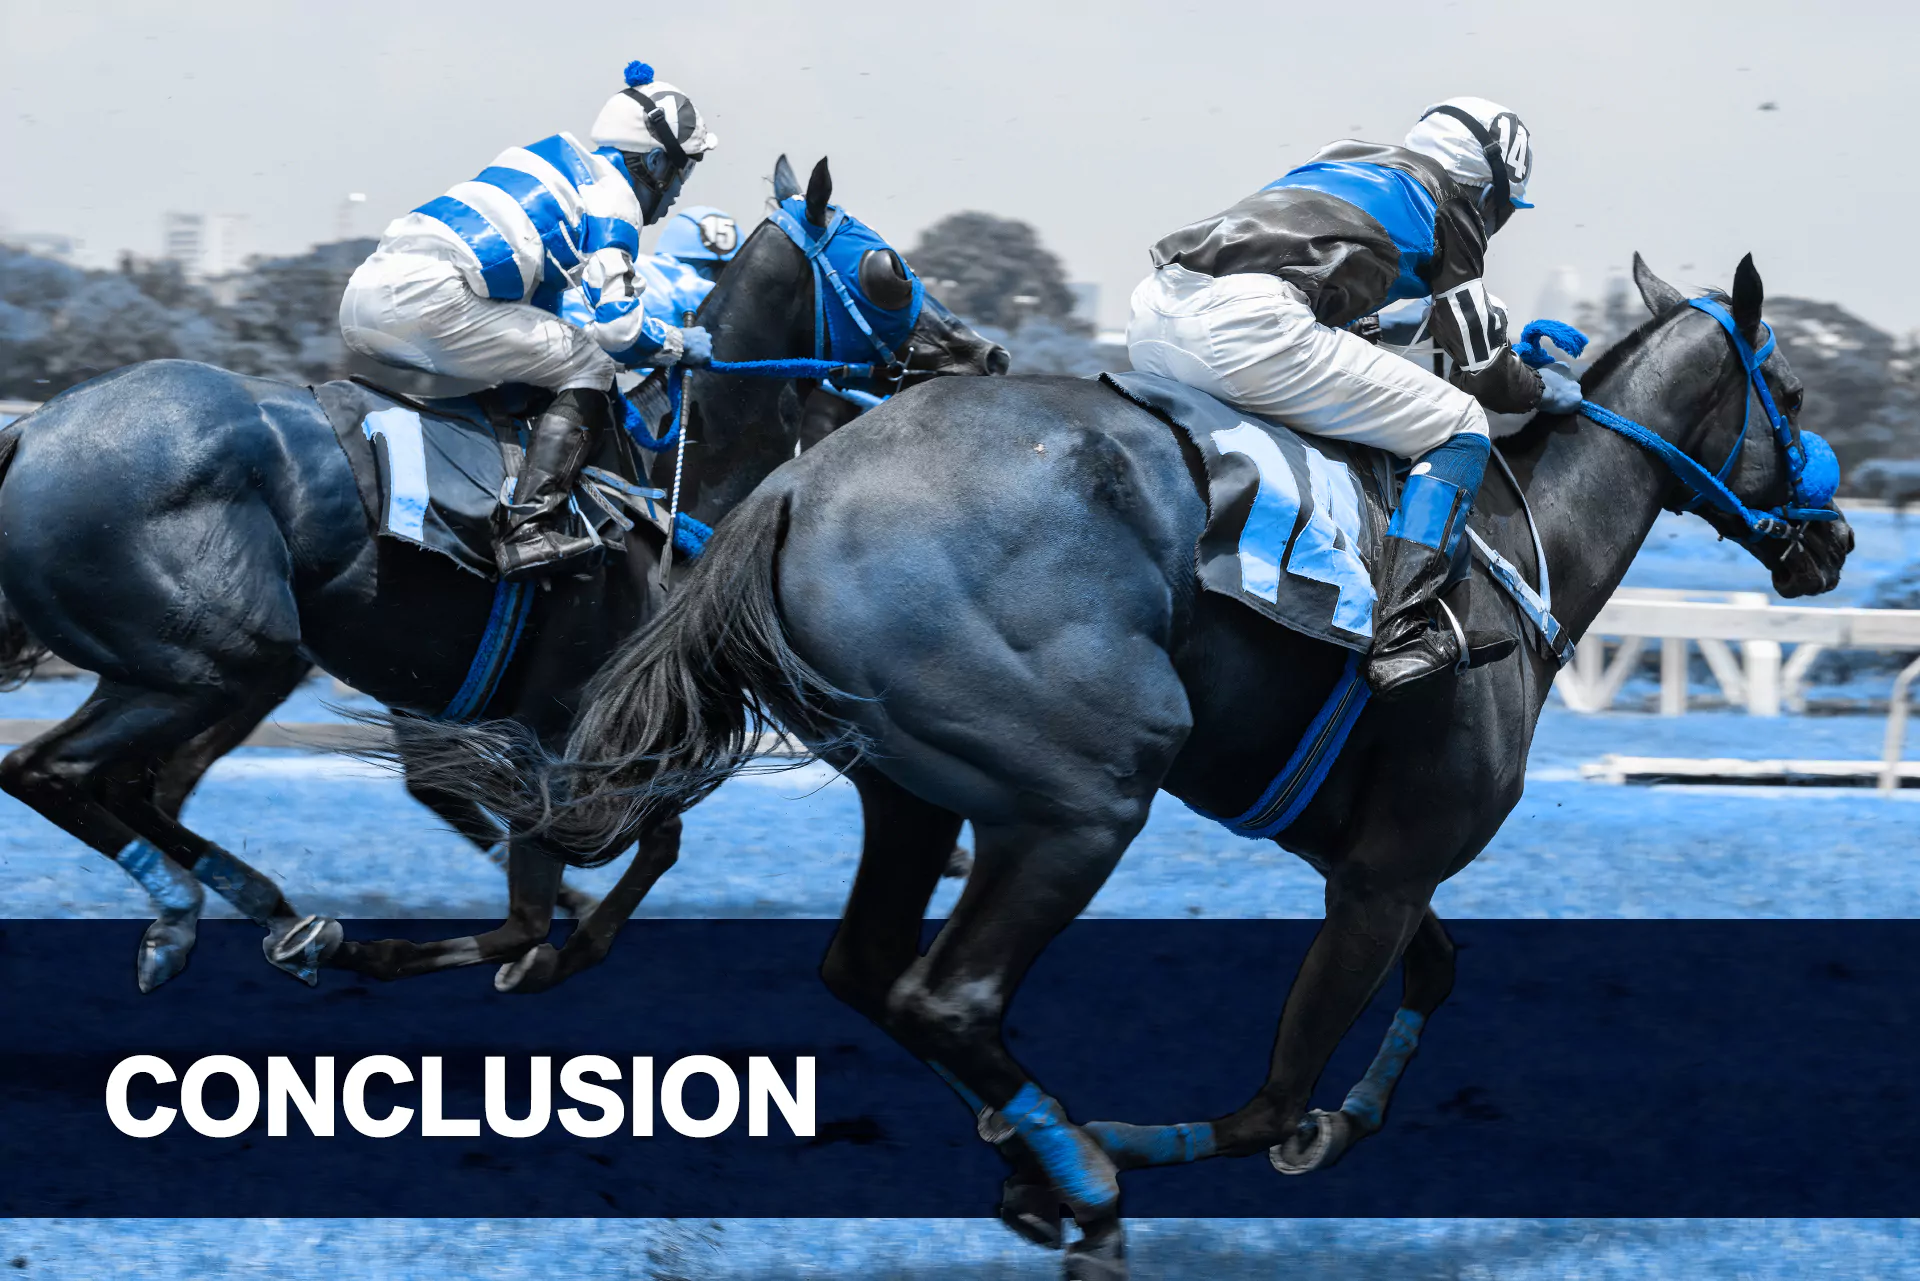 Even if you are a new user at 4rabet, you will easily learn how to bet on the horse racing events with the highest profit.